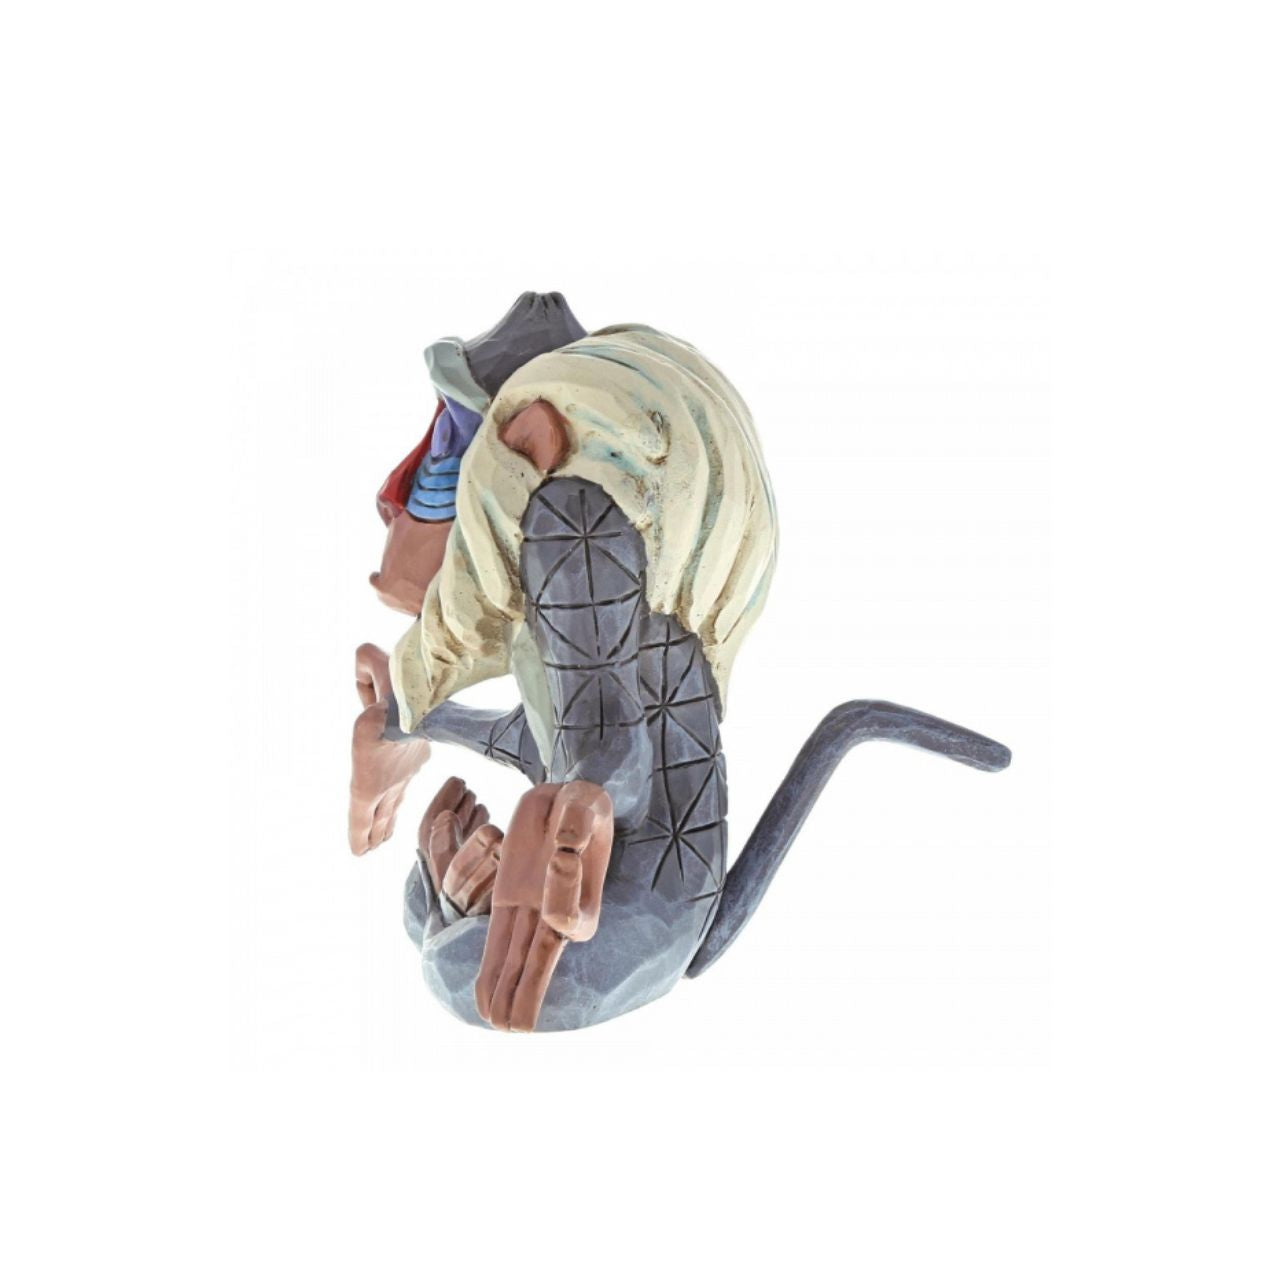 Rafiki, resident shaman of Disney's "The Lion King," sits in a meditative position in this colourful keepsake by Jim Shore. Handcrafted in intricate detail, the mini figurine captures the sage wisdom of the beloved Royal Mjuzi.